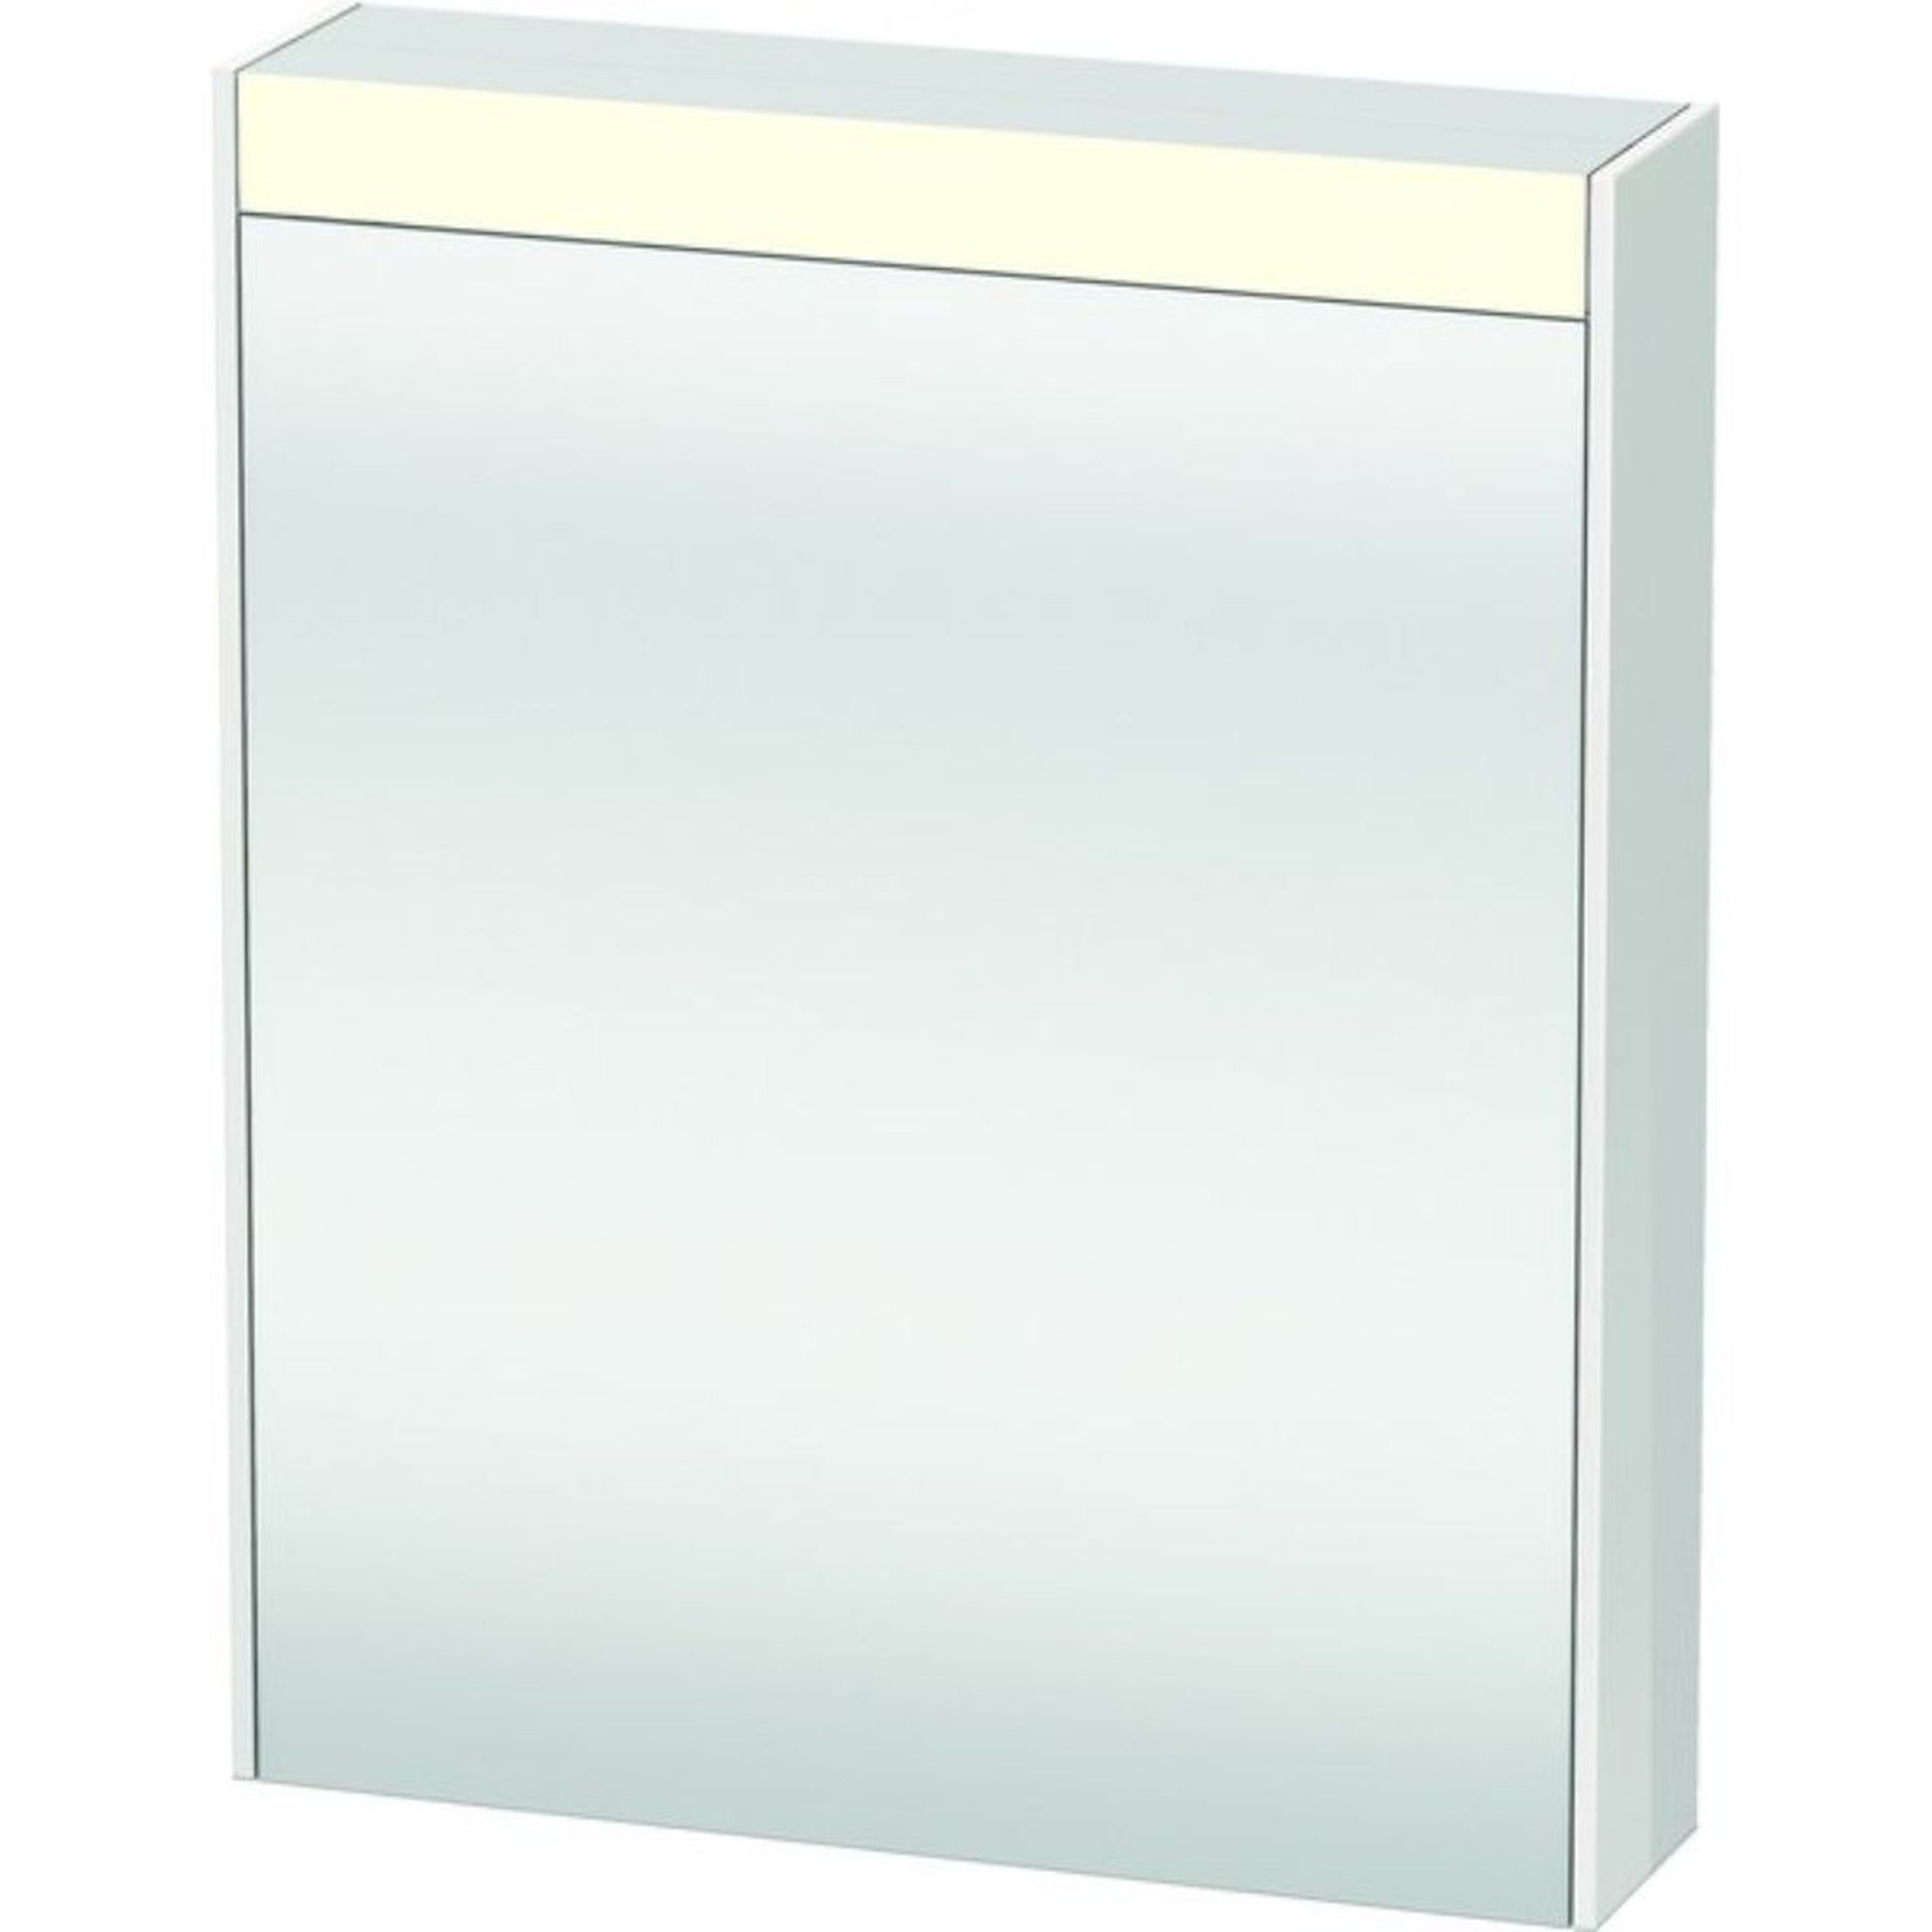 Duravit Brioso 24" x 30" x 6" Mirror With Right Hinge Cabinet and Lighting White High Gloss